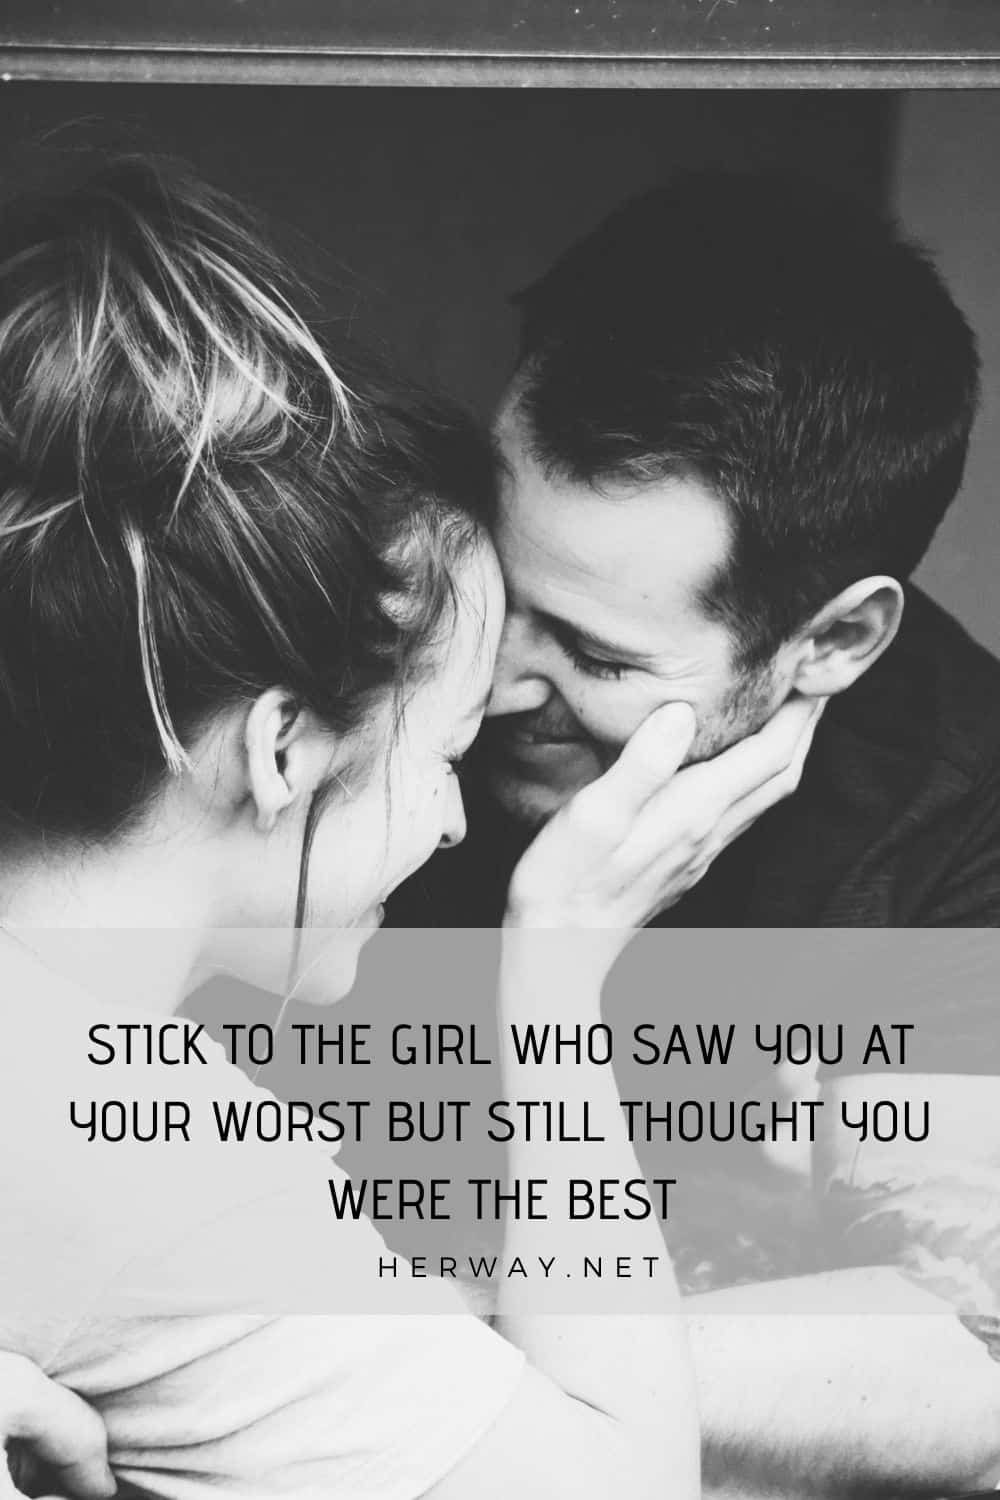 STICK TO THE GIRL WHO SAW YOU AT YOUR WORST BUT STILL THOUGHT YOU WERE THE BEST